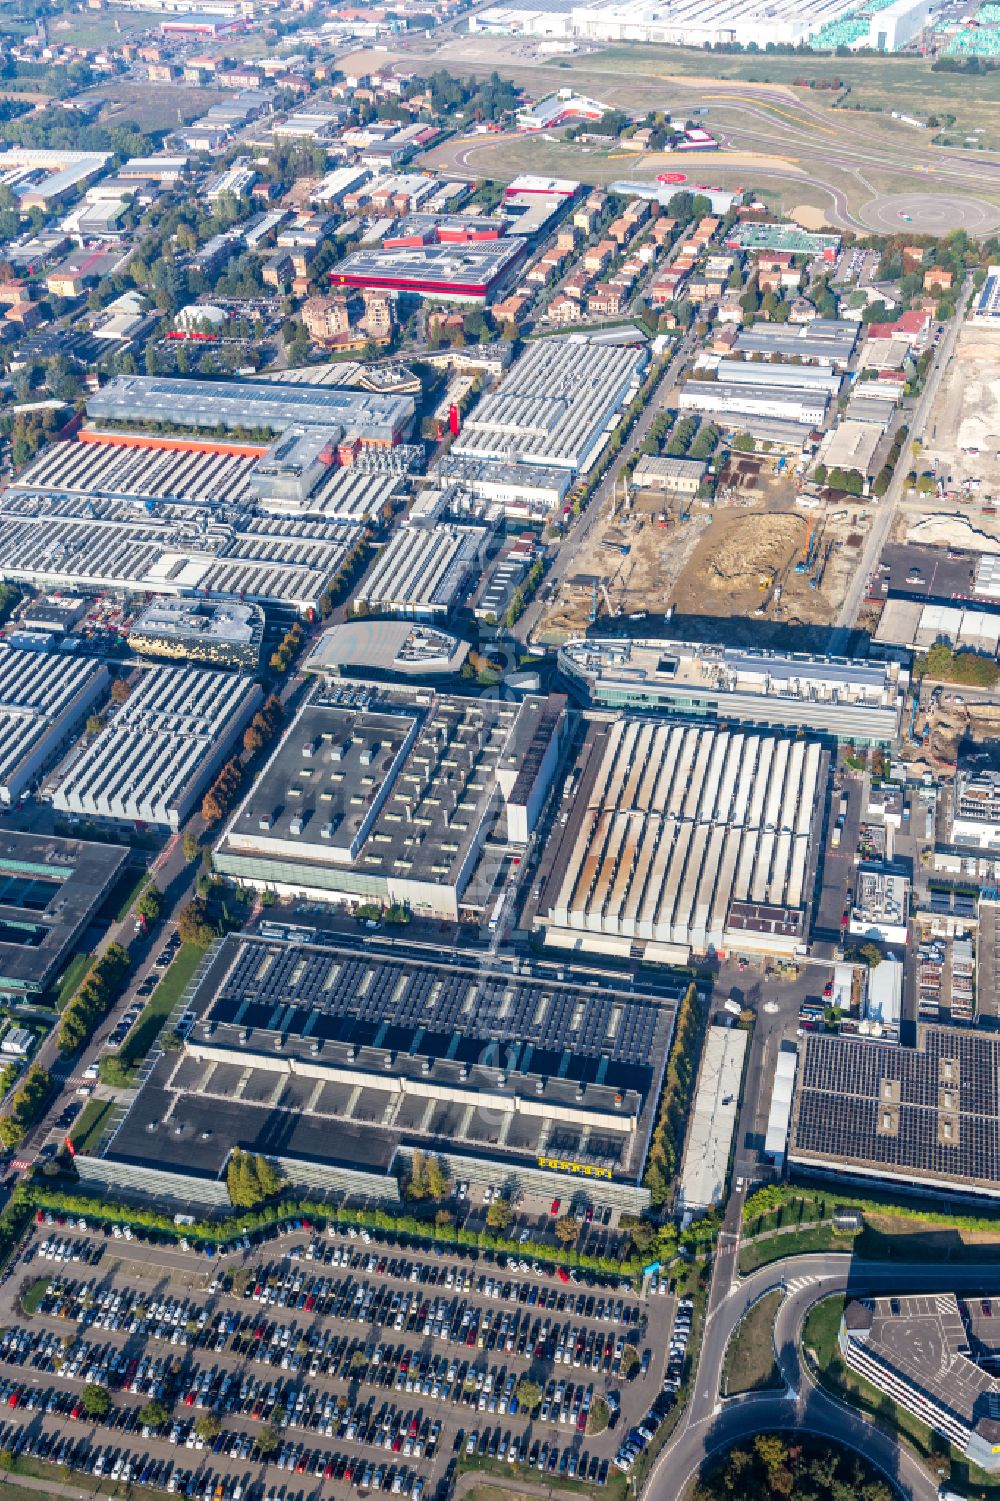 Aerial photograph Maranello - Buildings and production halls on the vehicle construction site Ferrari S.P.A. factory Maranello in Maranello in Emilia-Romagna, Italy